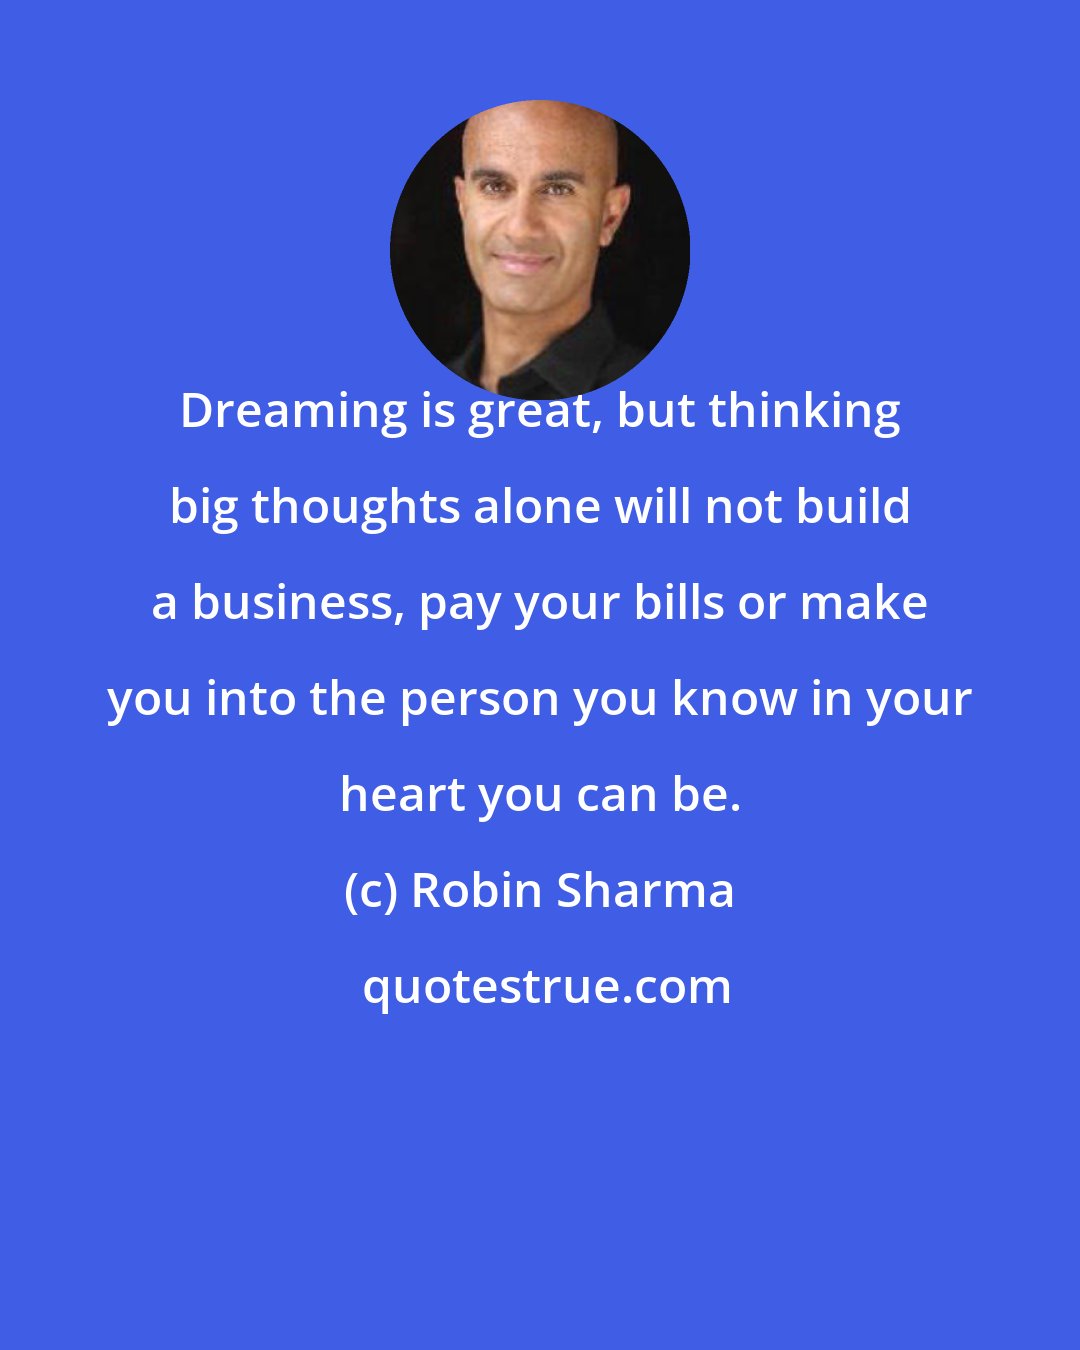 Robin Sharma: Dreaming is great, but thinking big thoughts alone will not build a business, pay your bills or make you into the person you know in your heart you can be.